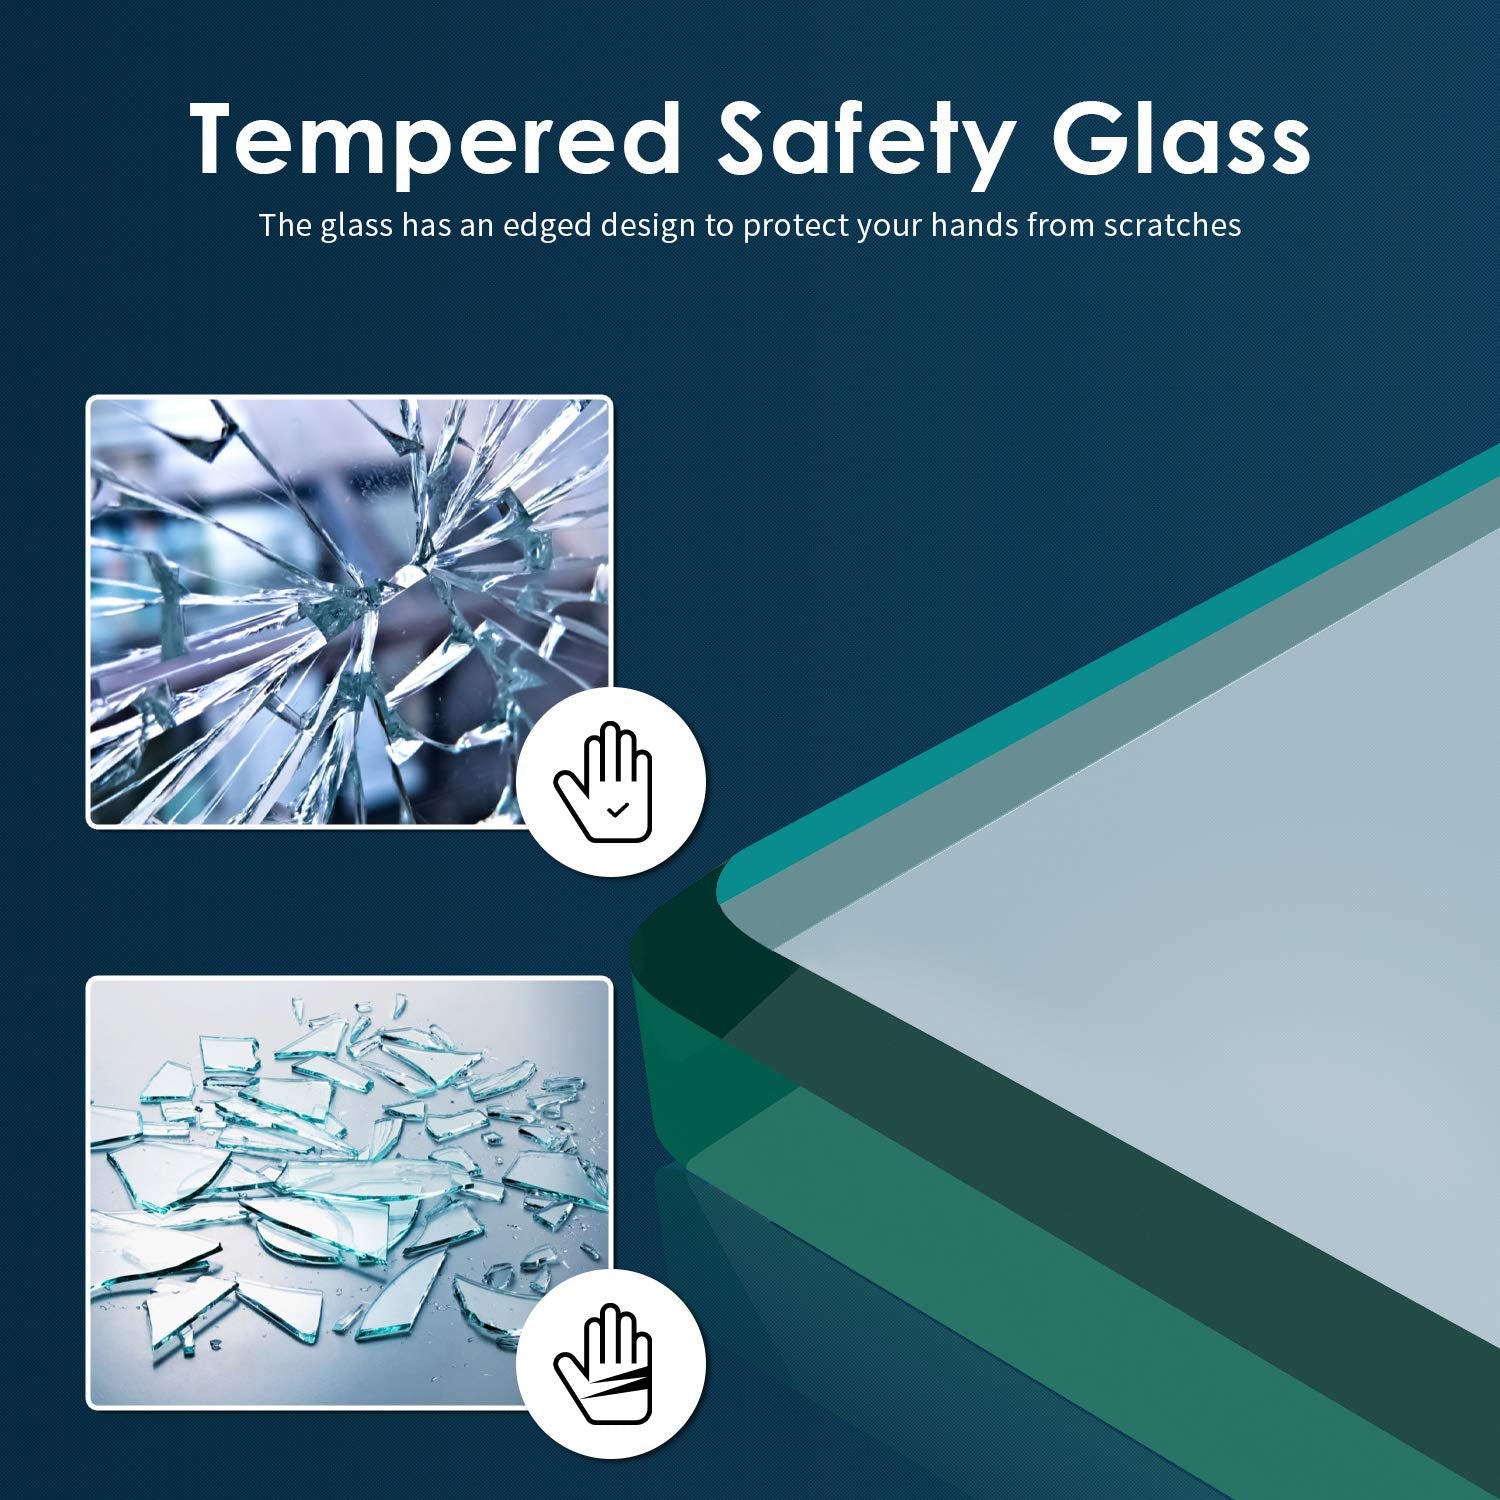  1/4" (6mm) clear tempered glass -safety ANSI Z97.1 certified. No shatter, prevent dirty and easy to clean.